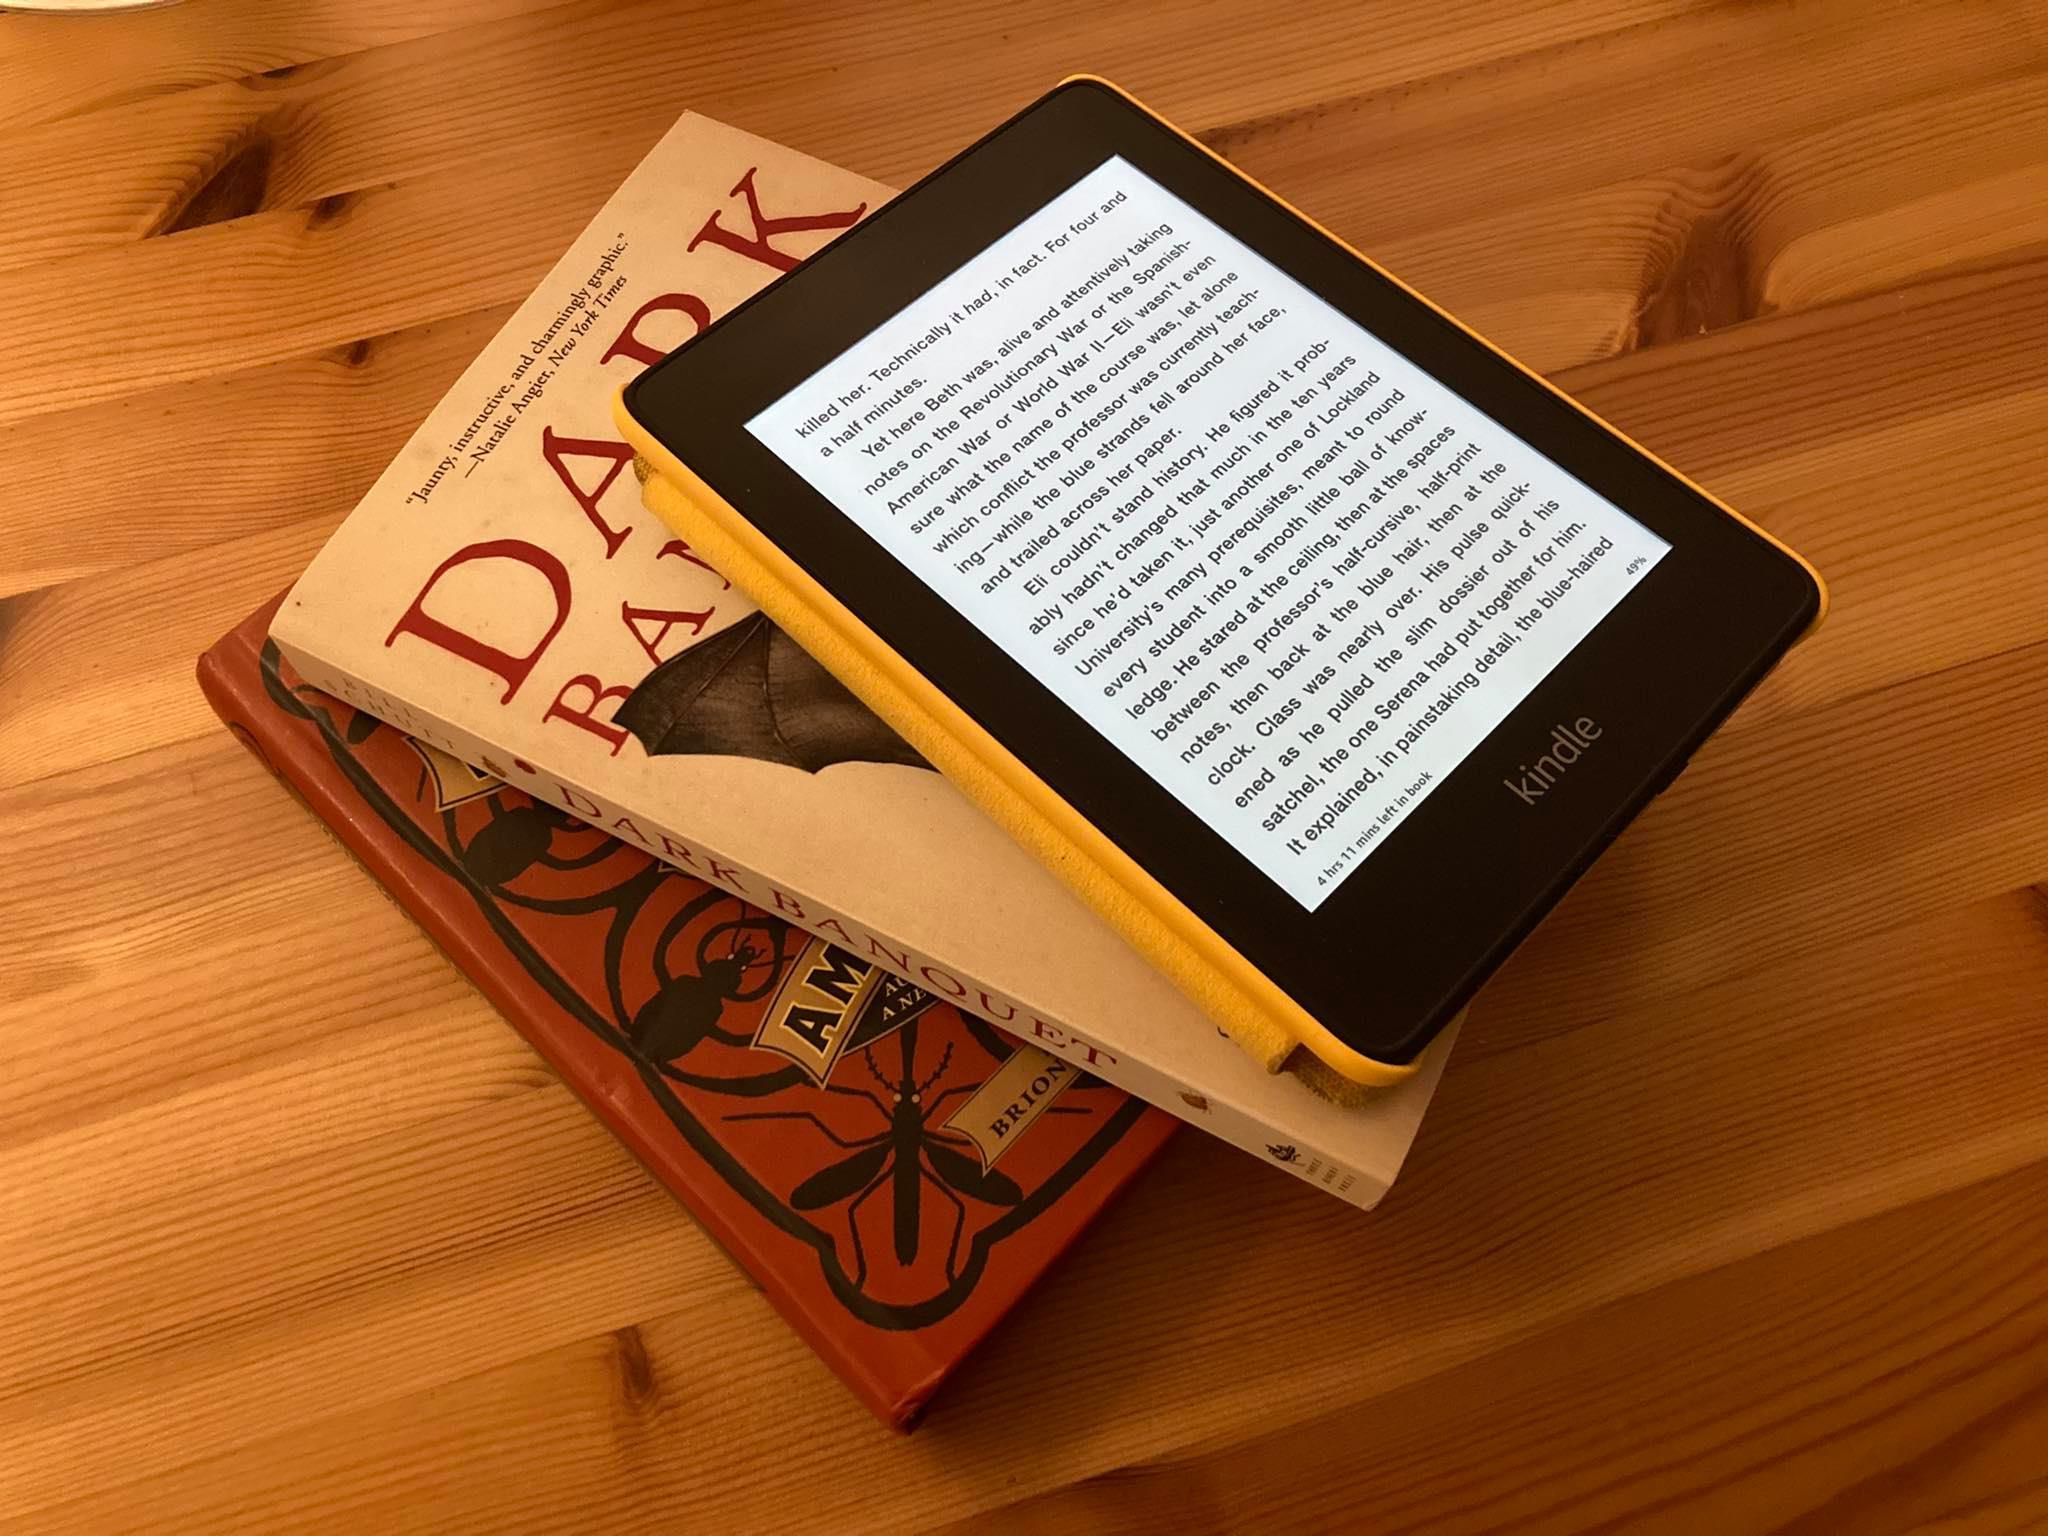 reading tamil books in kindle